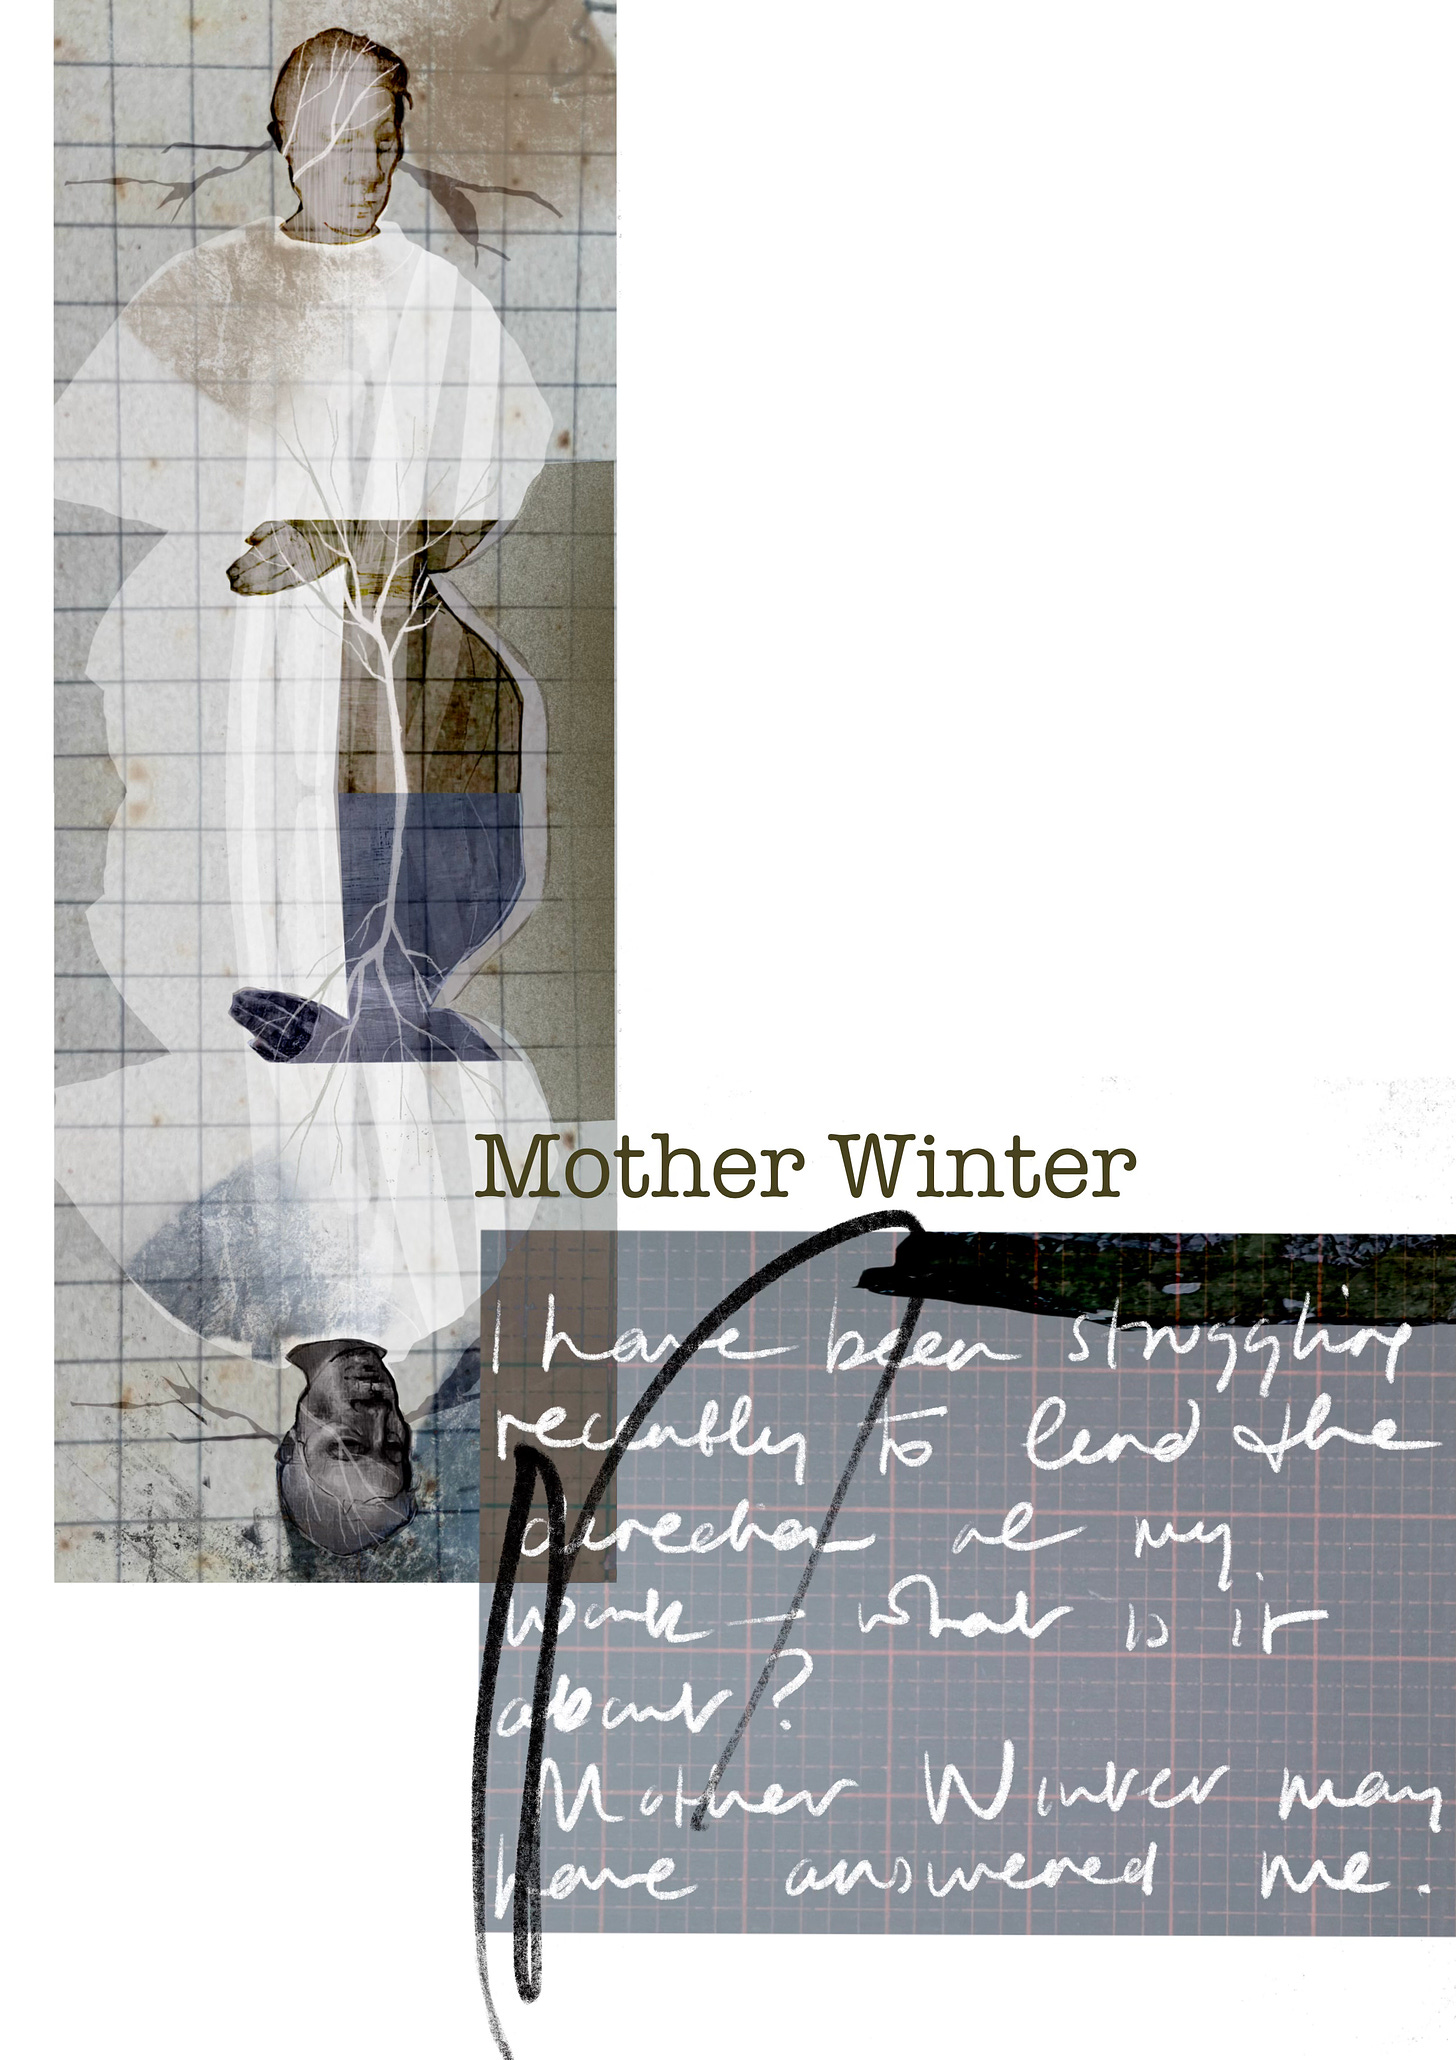 I have been struggling recently to find the direction of my work - what is it about? Mother Winter may have answered me.